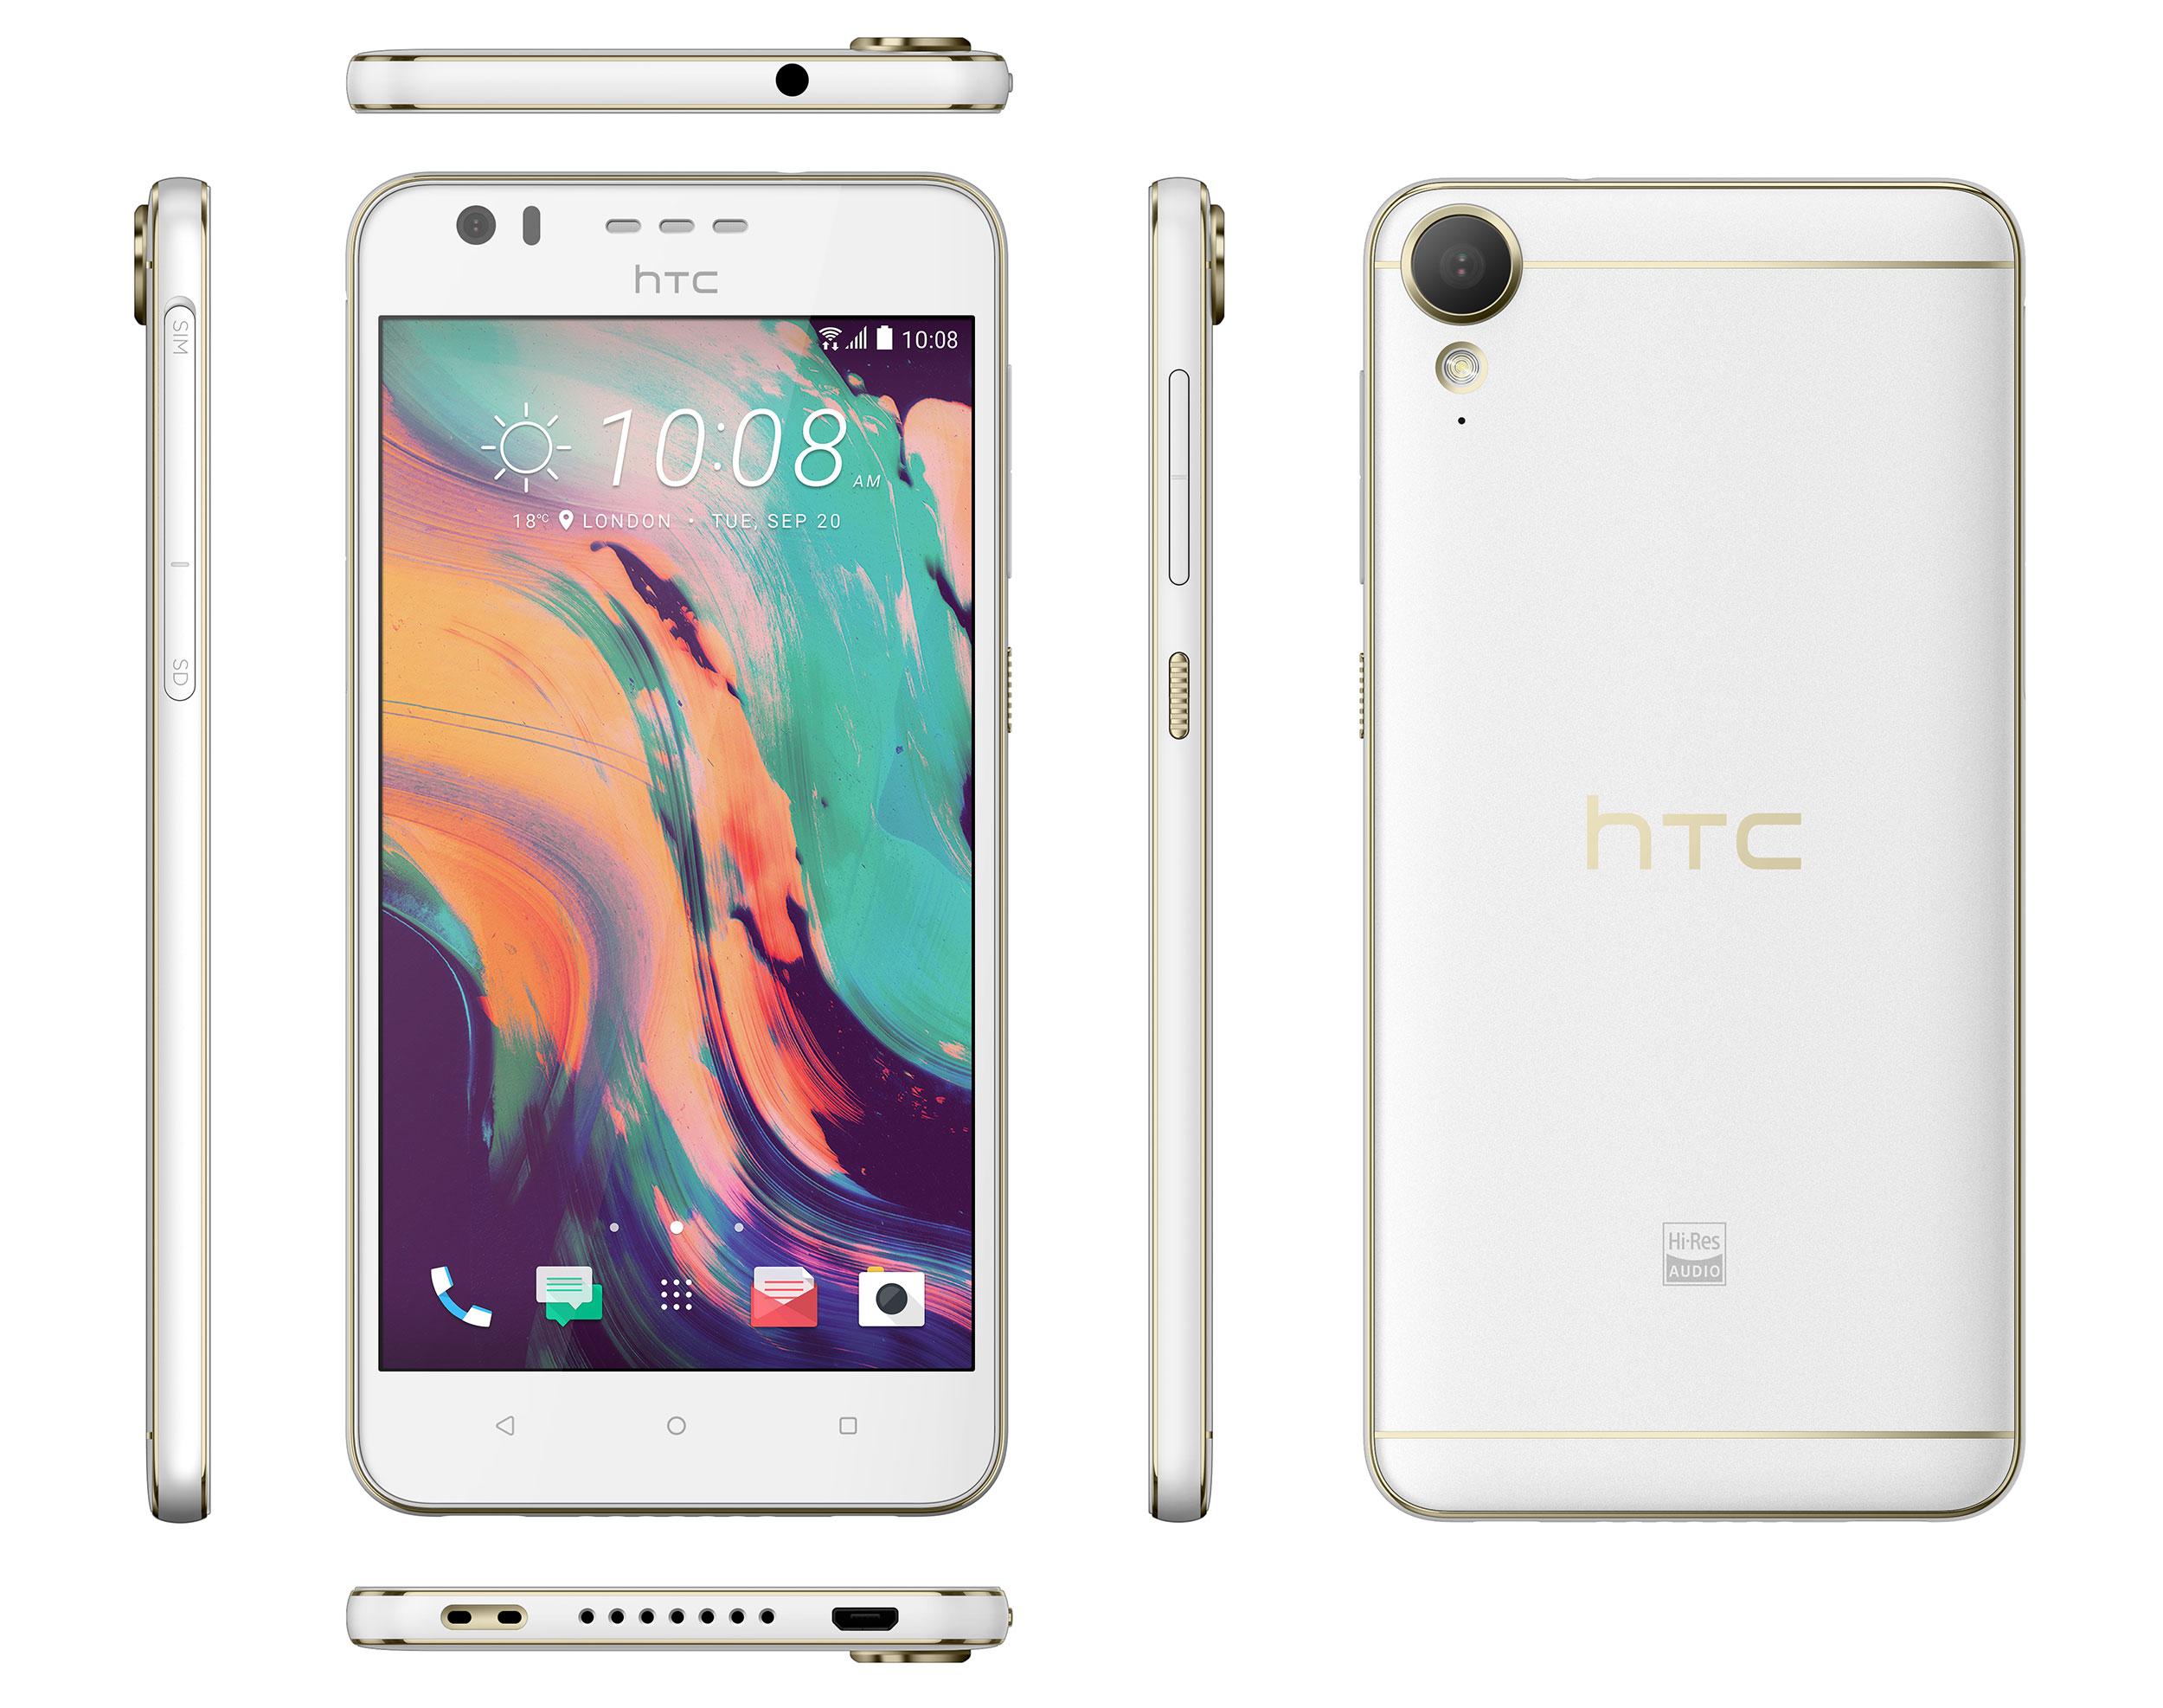 HTC Desire 10 LIfestyle vista frontal, lateral y trasera